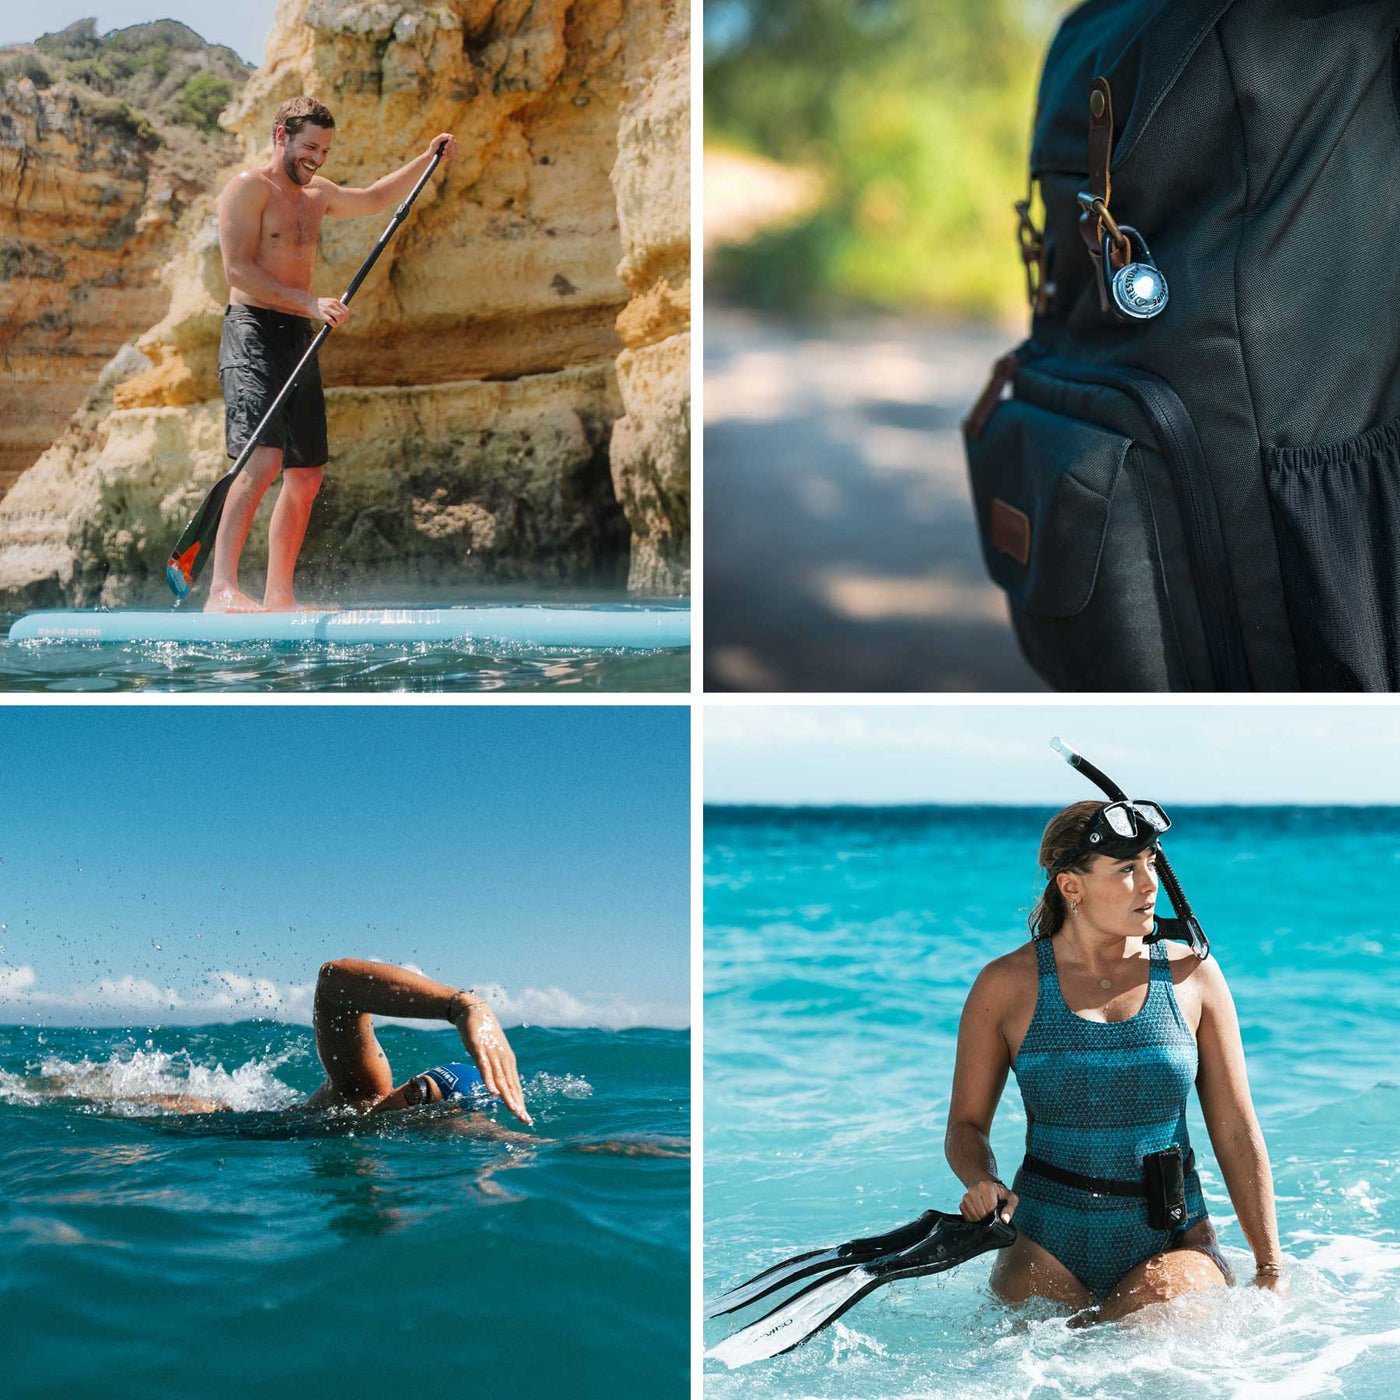 suitable for different outdoor activities for example SUP, Swimming, Hiking, Snorkeling